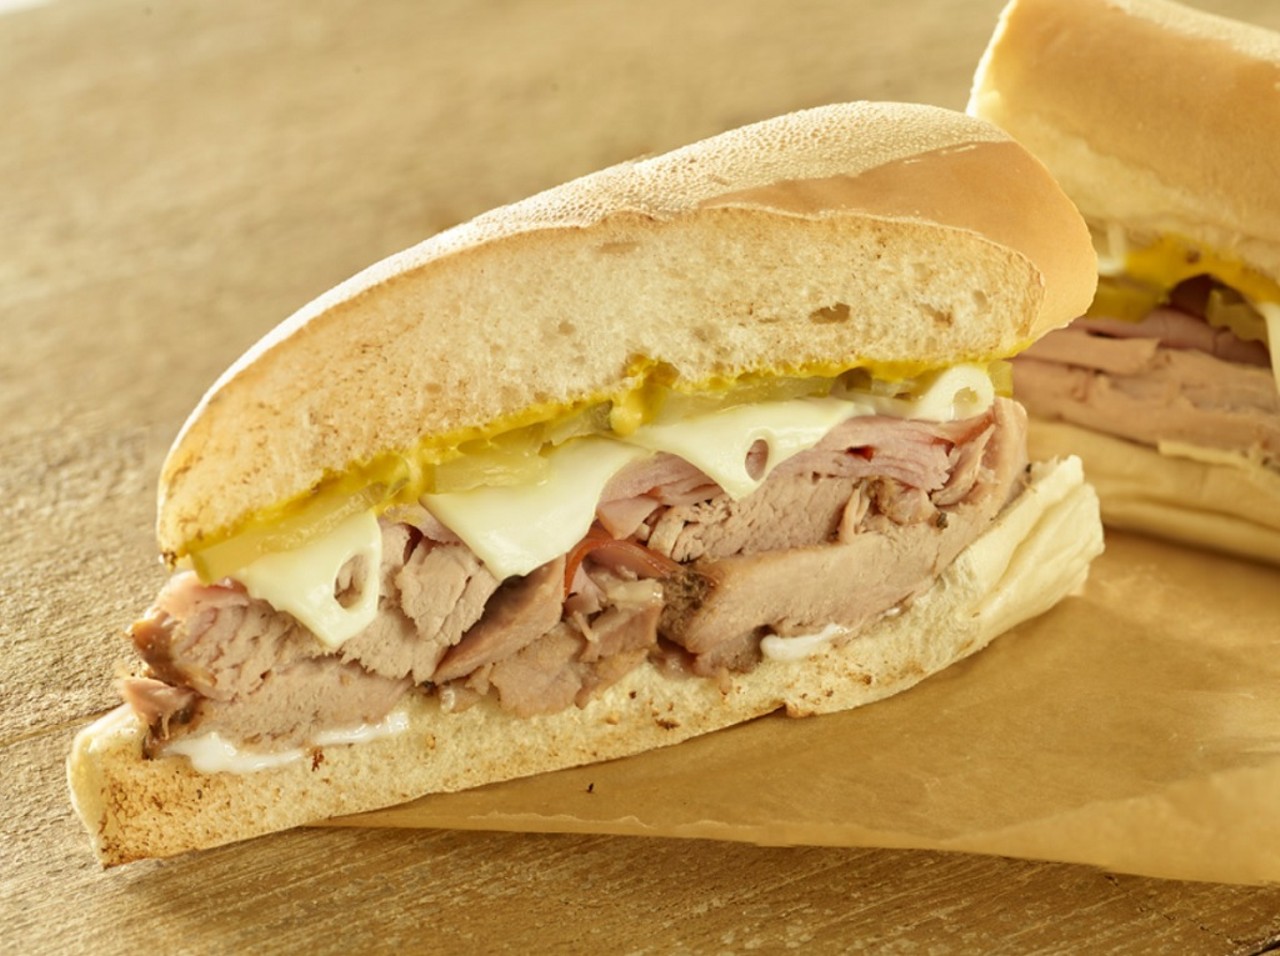 Meson Sandwiches 
Multiple locations
This restaurant chain is based out of Puerto Rico, but that doesn&#146;t mean they don&#146;t have an amazing Cuban sandwich. 
Photo via Meson Sandwiches/Website